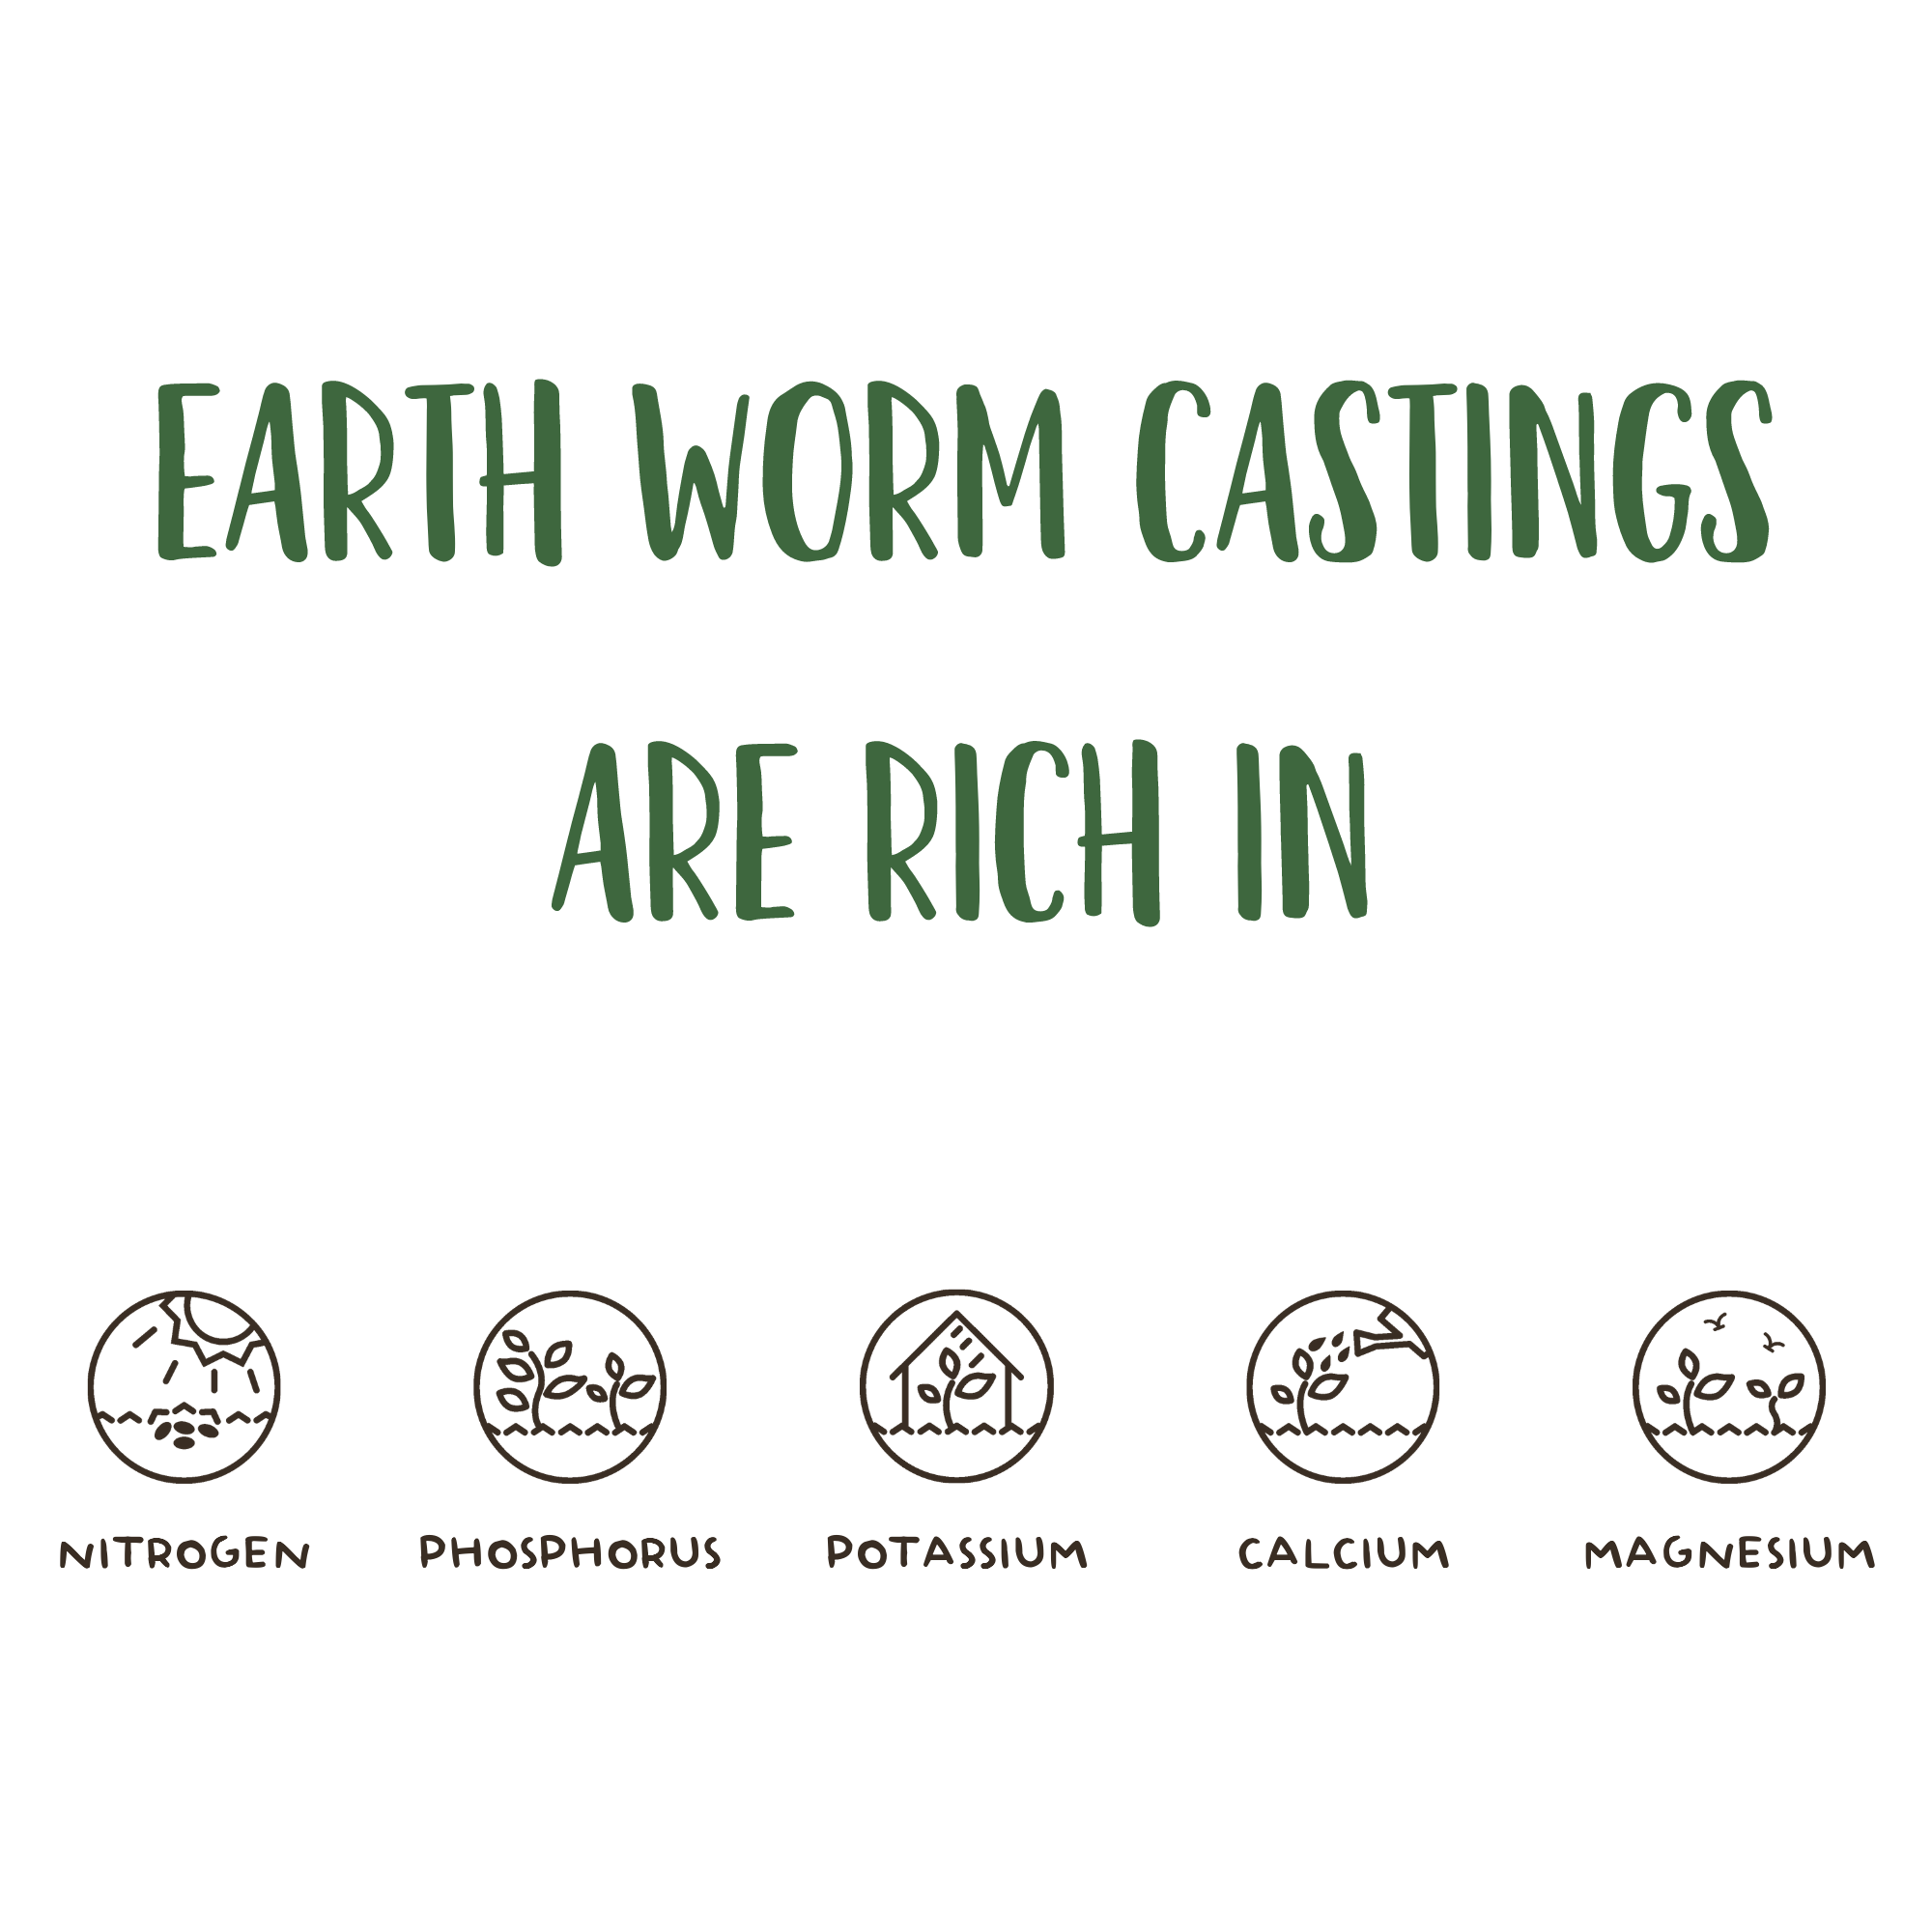 Earth Worm Castings – Organic Red Worm Compost Soil Amendment - .13 cubic foot - Approximately 1 Gallon - 6 Lbs - Organic Red Worm Vermiculture and Compost Home, Garden, Greenhouse, and Farm - image 5 of 7